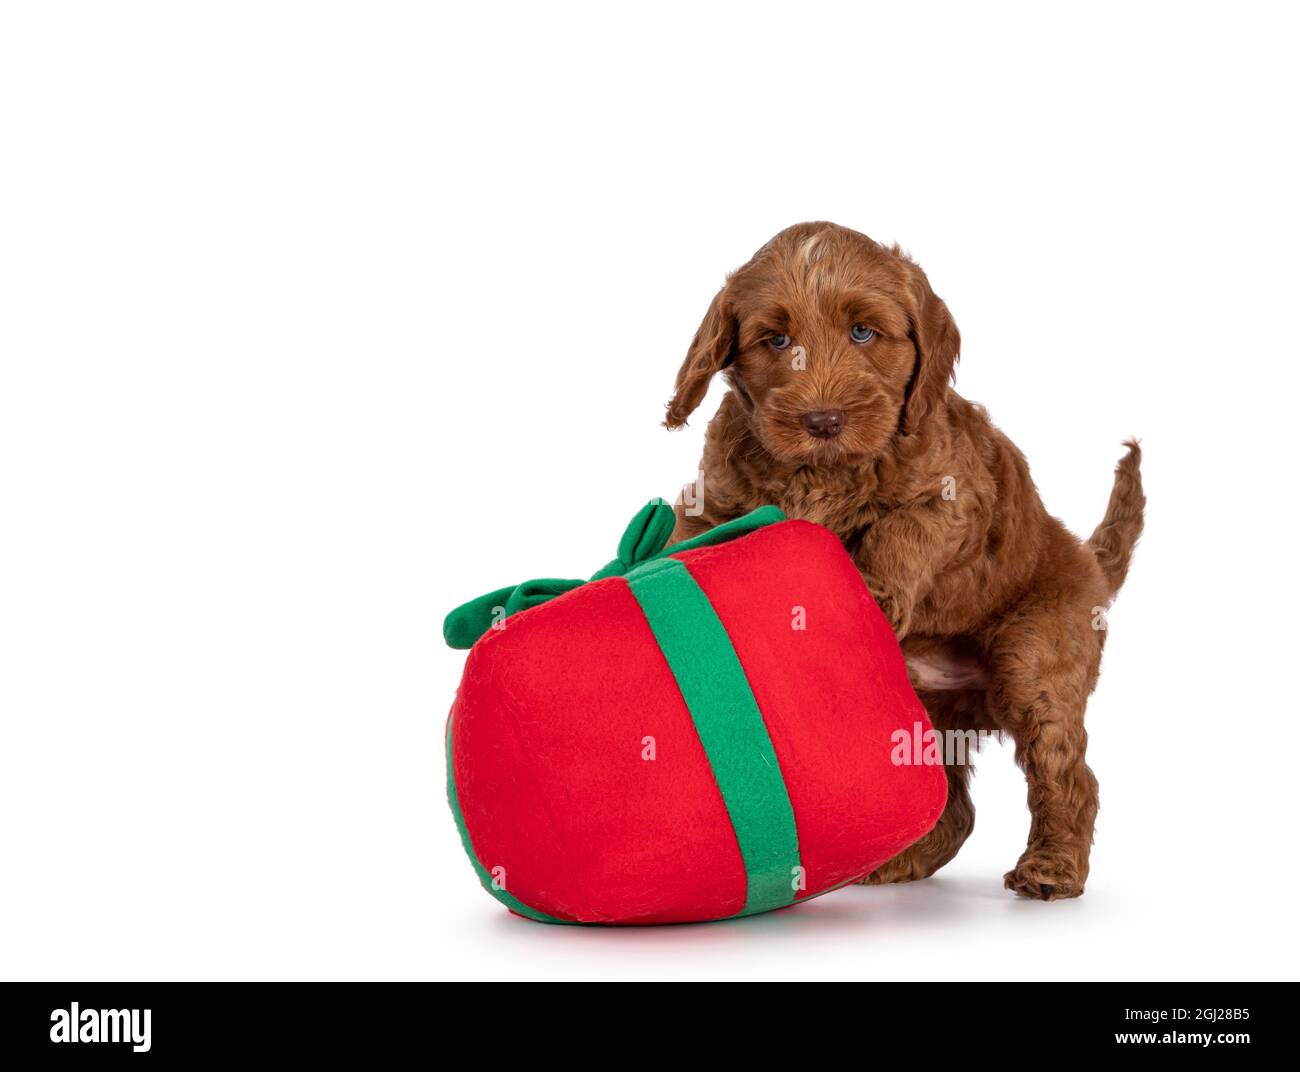 Adorable Cobberdog puppy aka Labradoodle dog, playing with toy Christmas present. Looking away from camera. Isolated on a white background. Stock Photo